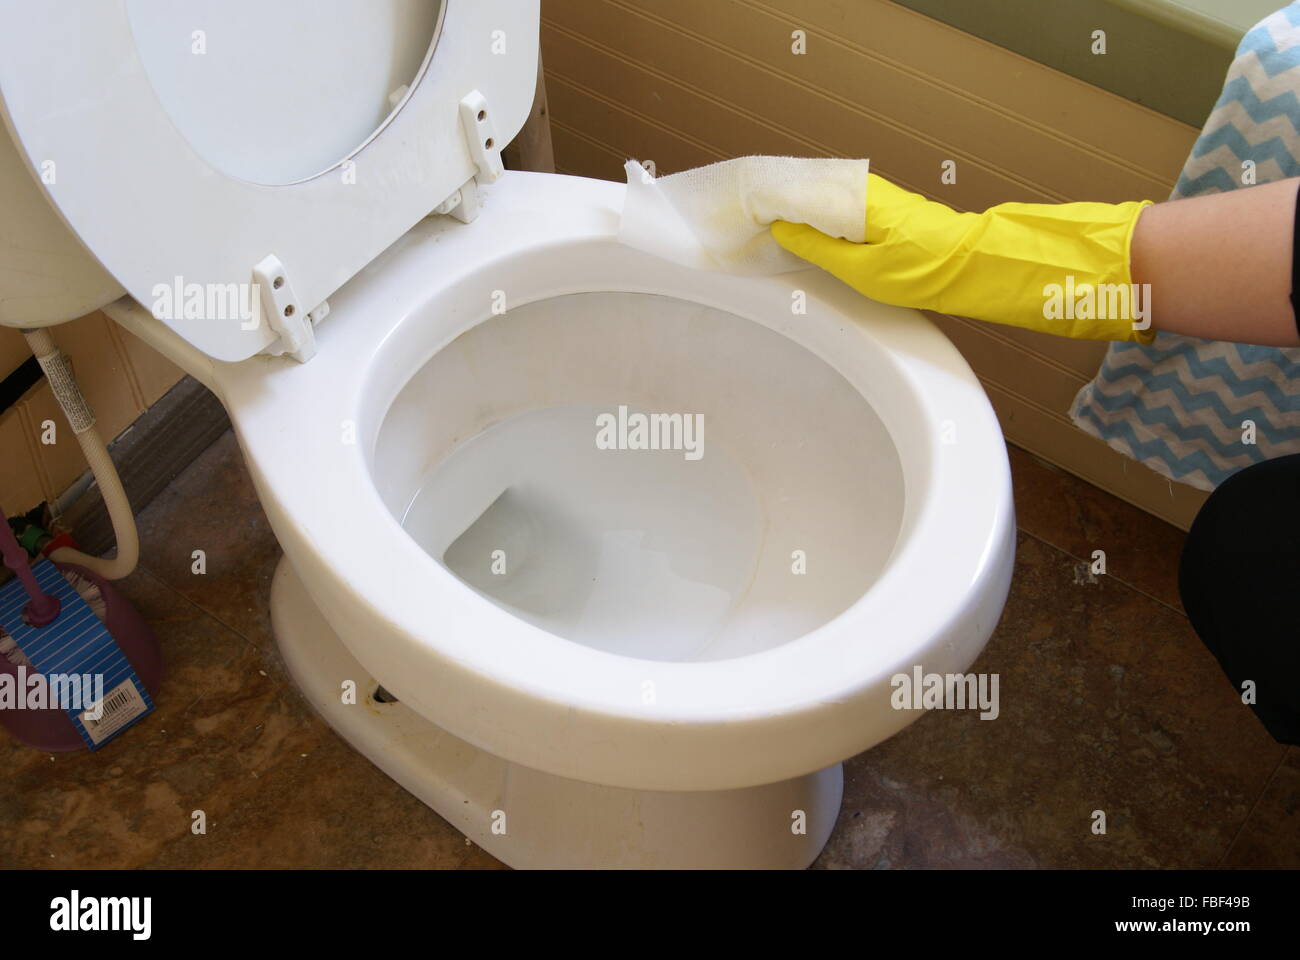 Cleaning the bathroom toilet Stock Photo